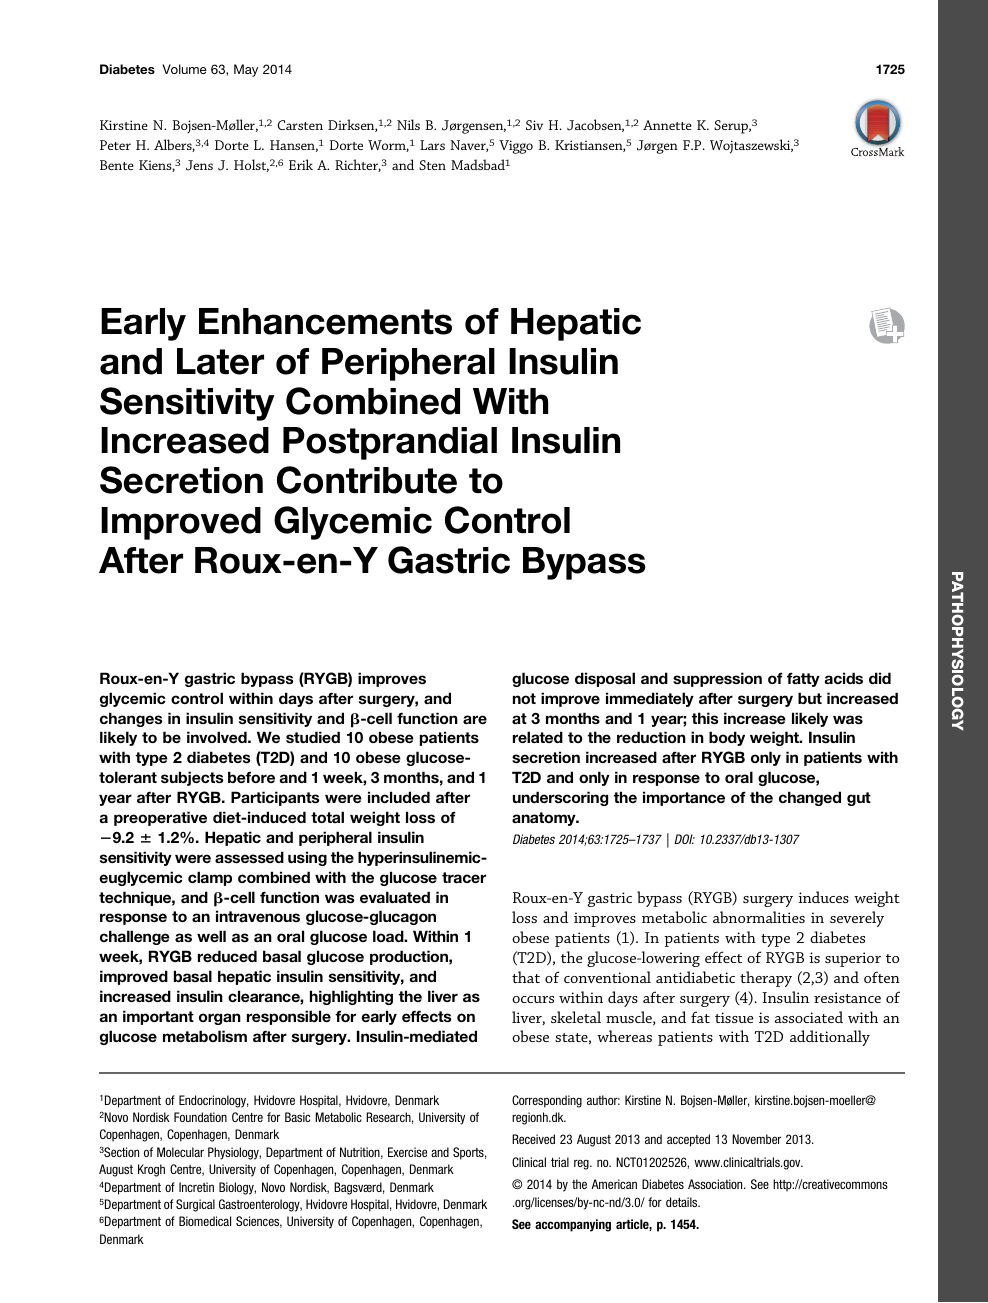 Early Enhancements Of Hepatic And Later Of Peripheral Insulin Sensitivity Combined With Increased Postprandial Insulin Secretion Contribute To Improved Glycemic Control After Roux En Y Gastric Bypass Topic Of Research Paper In Clinical